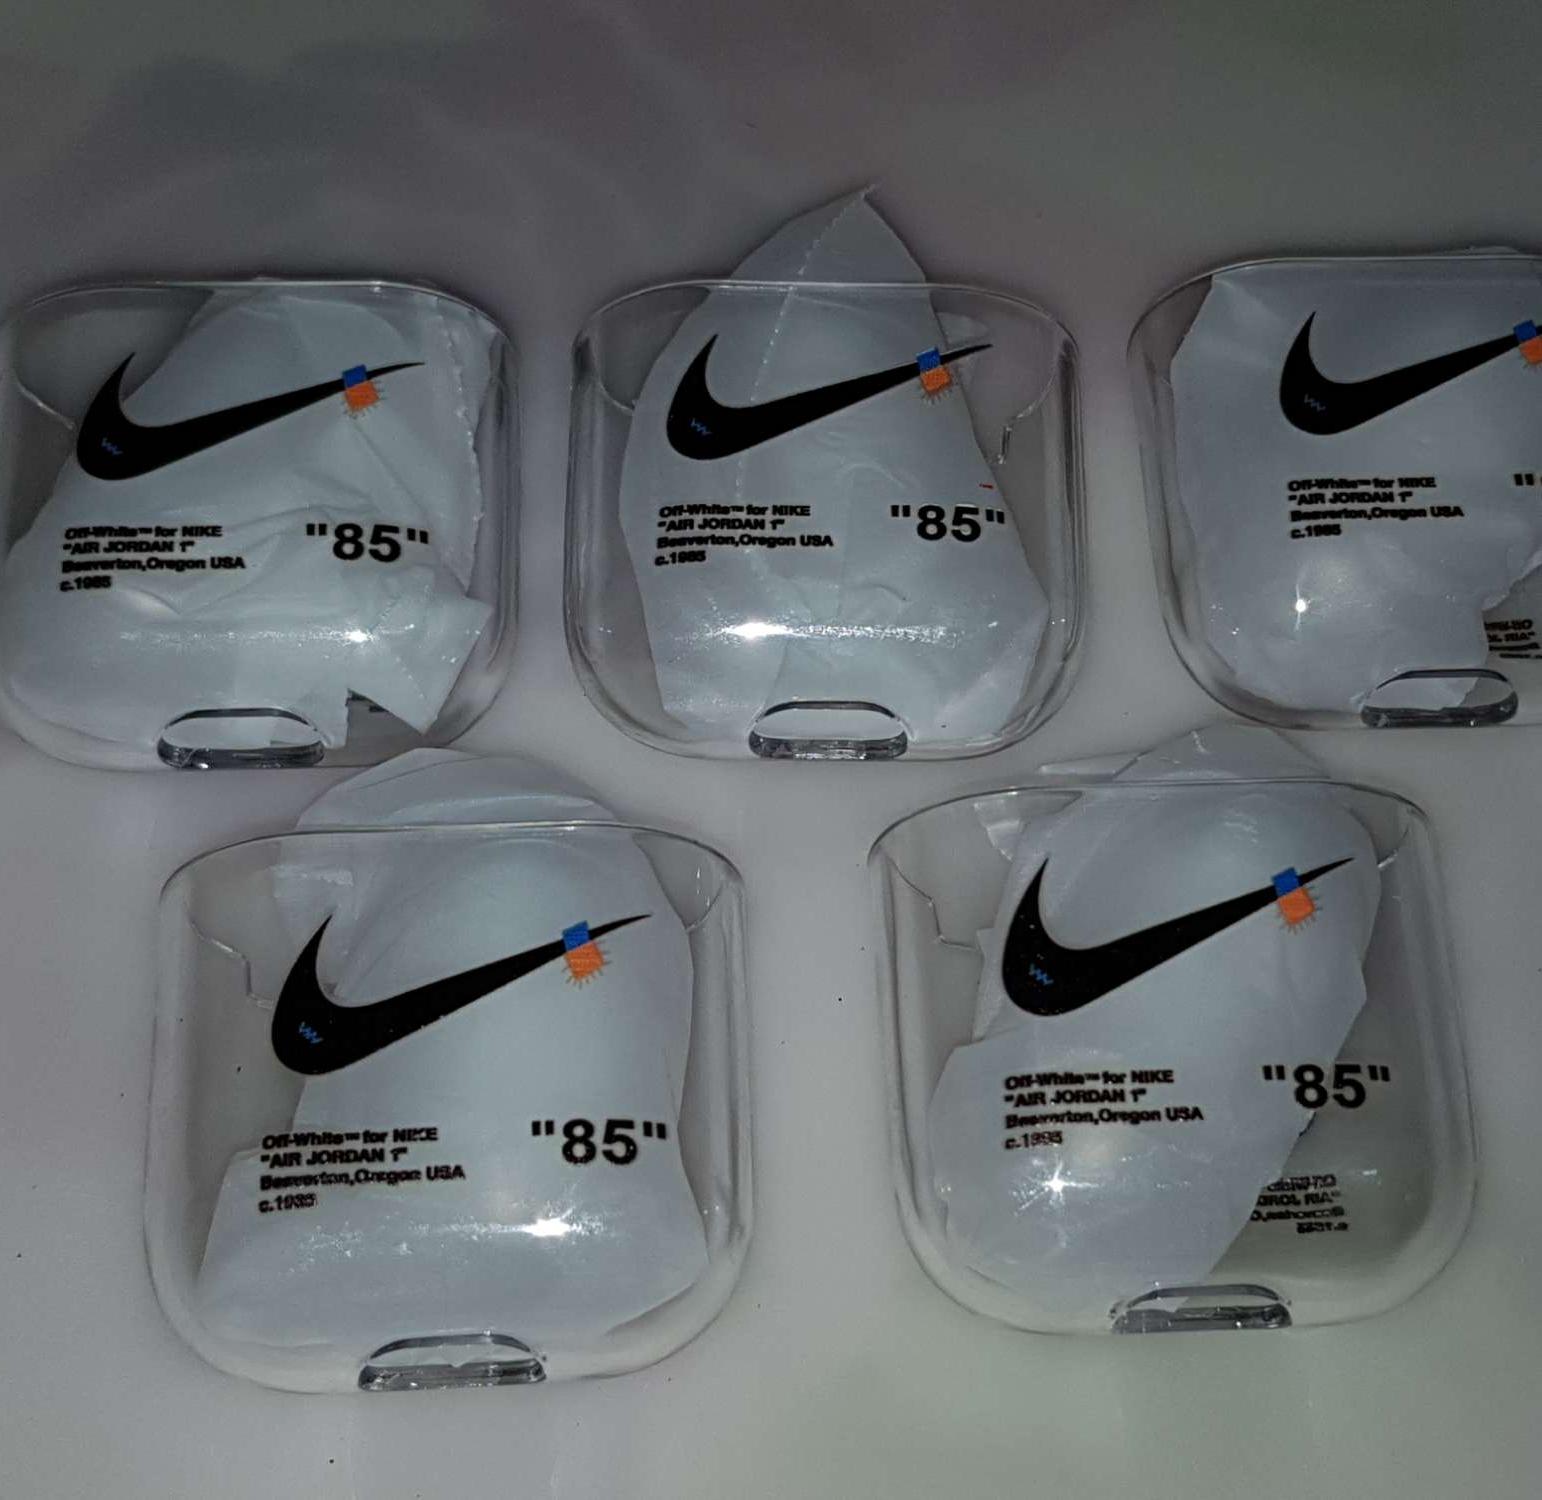 airpods case cover nike off white